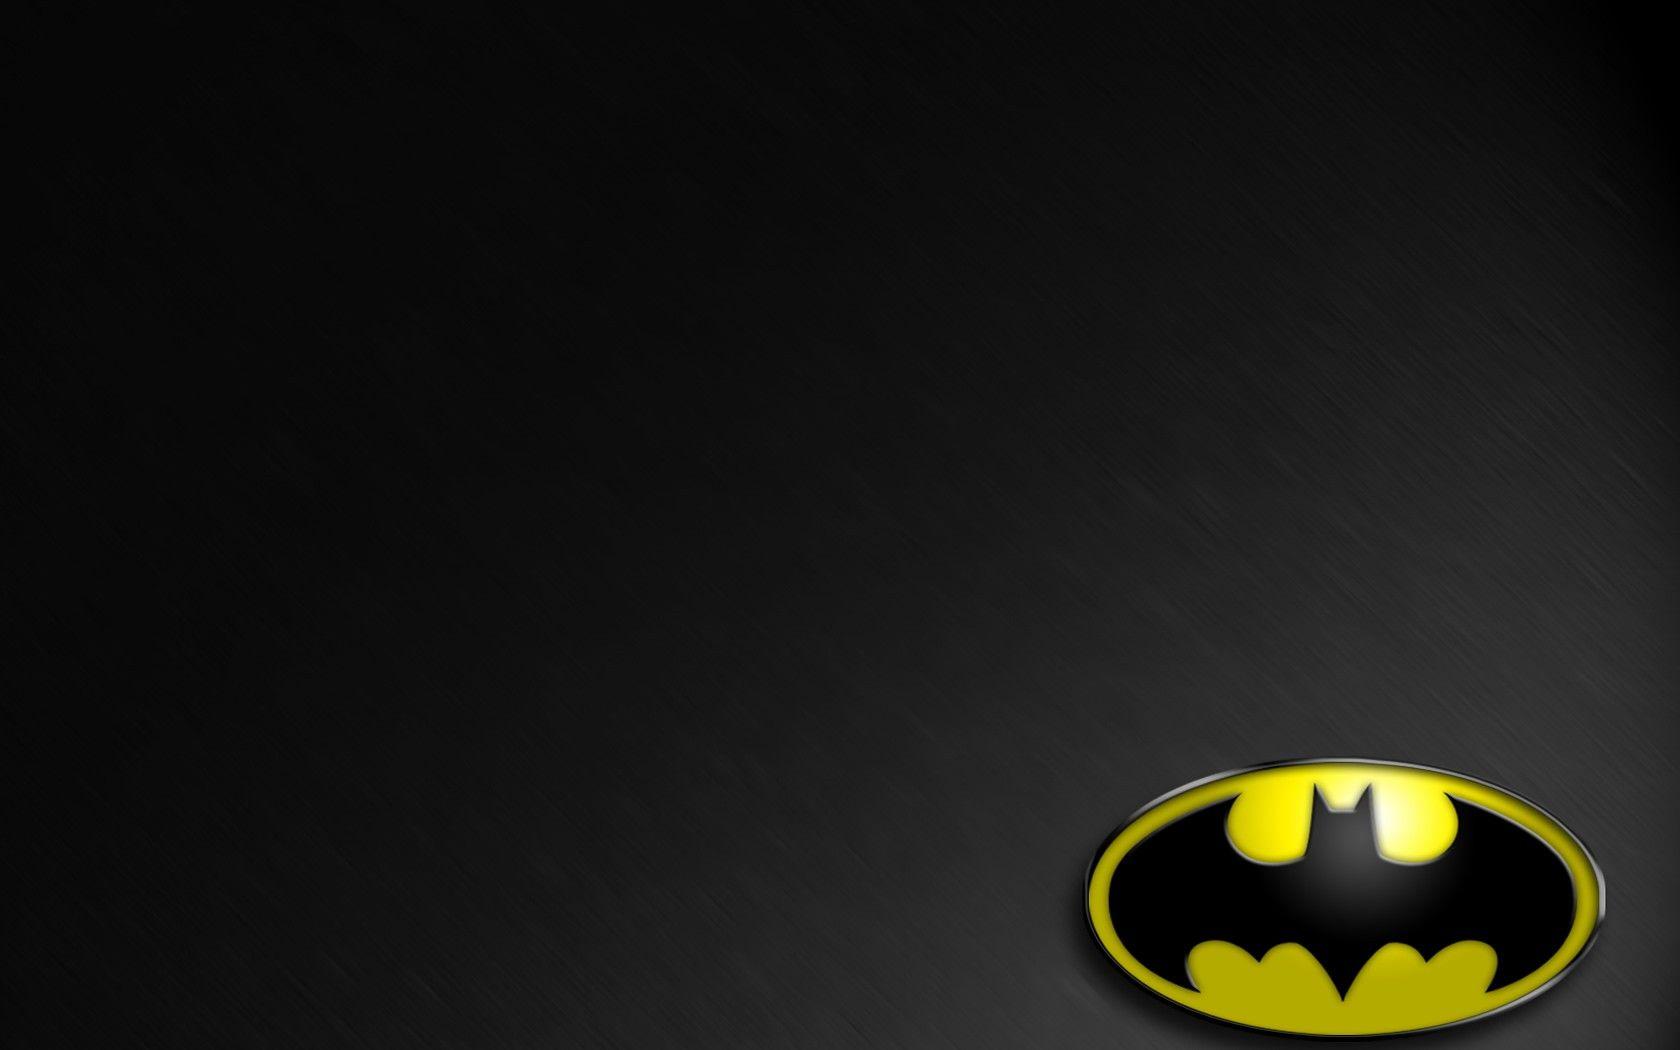 Download the Batman Outfit Wallpaper, Batman Outfit iPhone Wallpapers